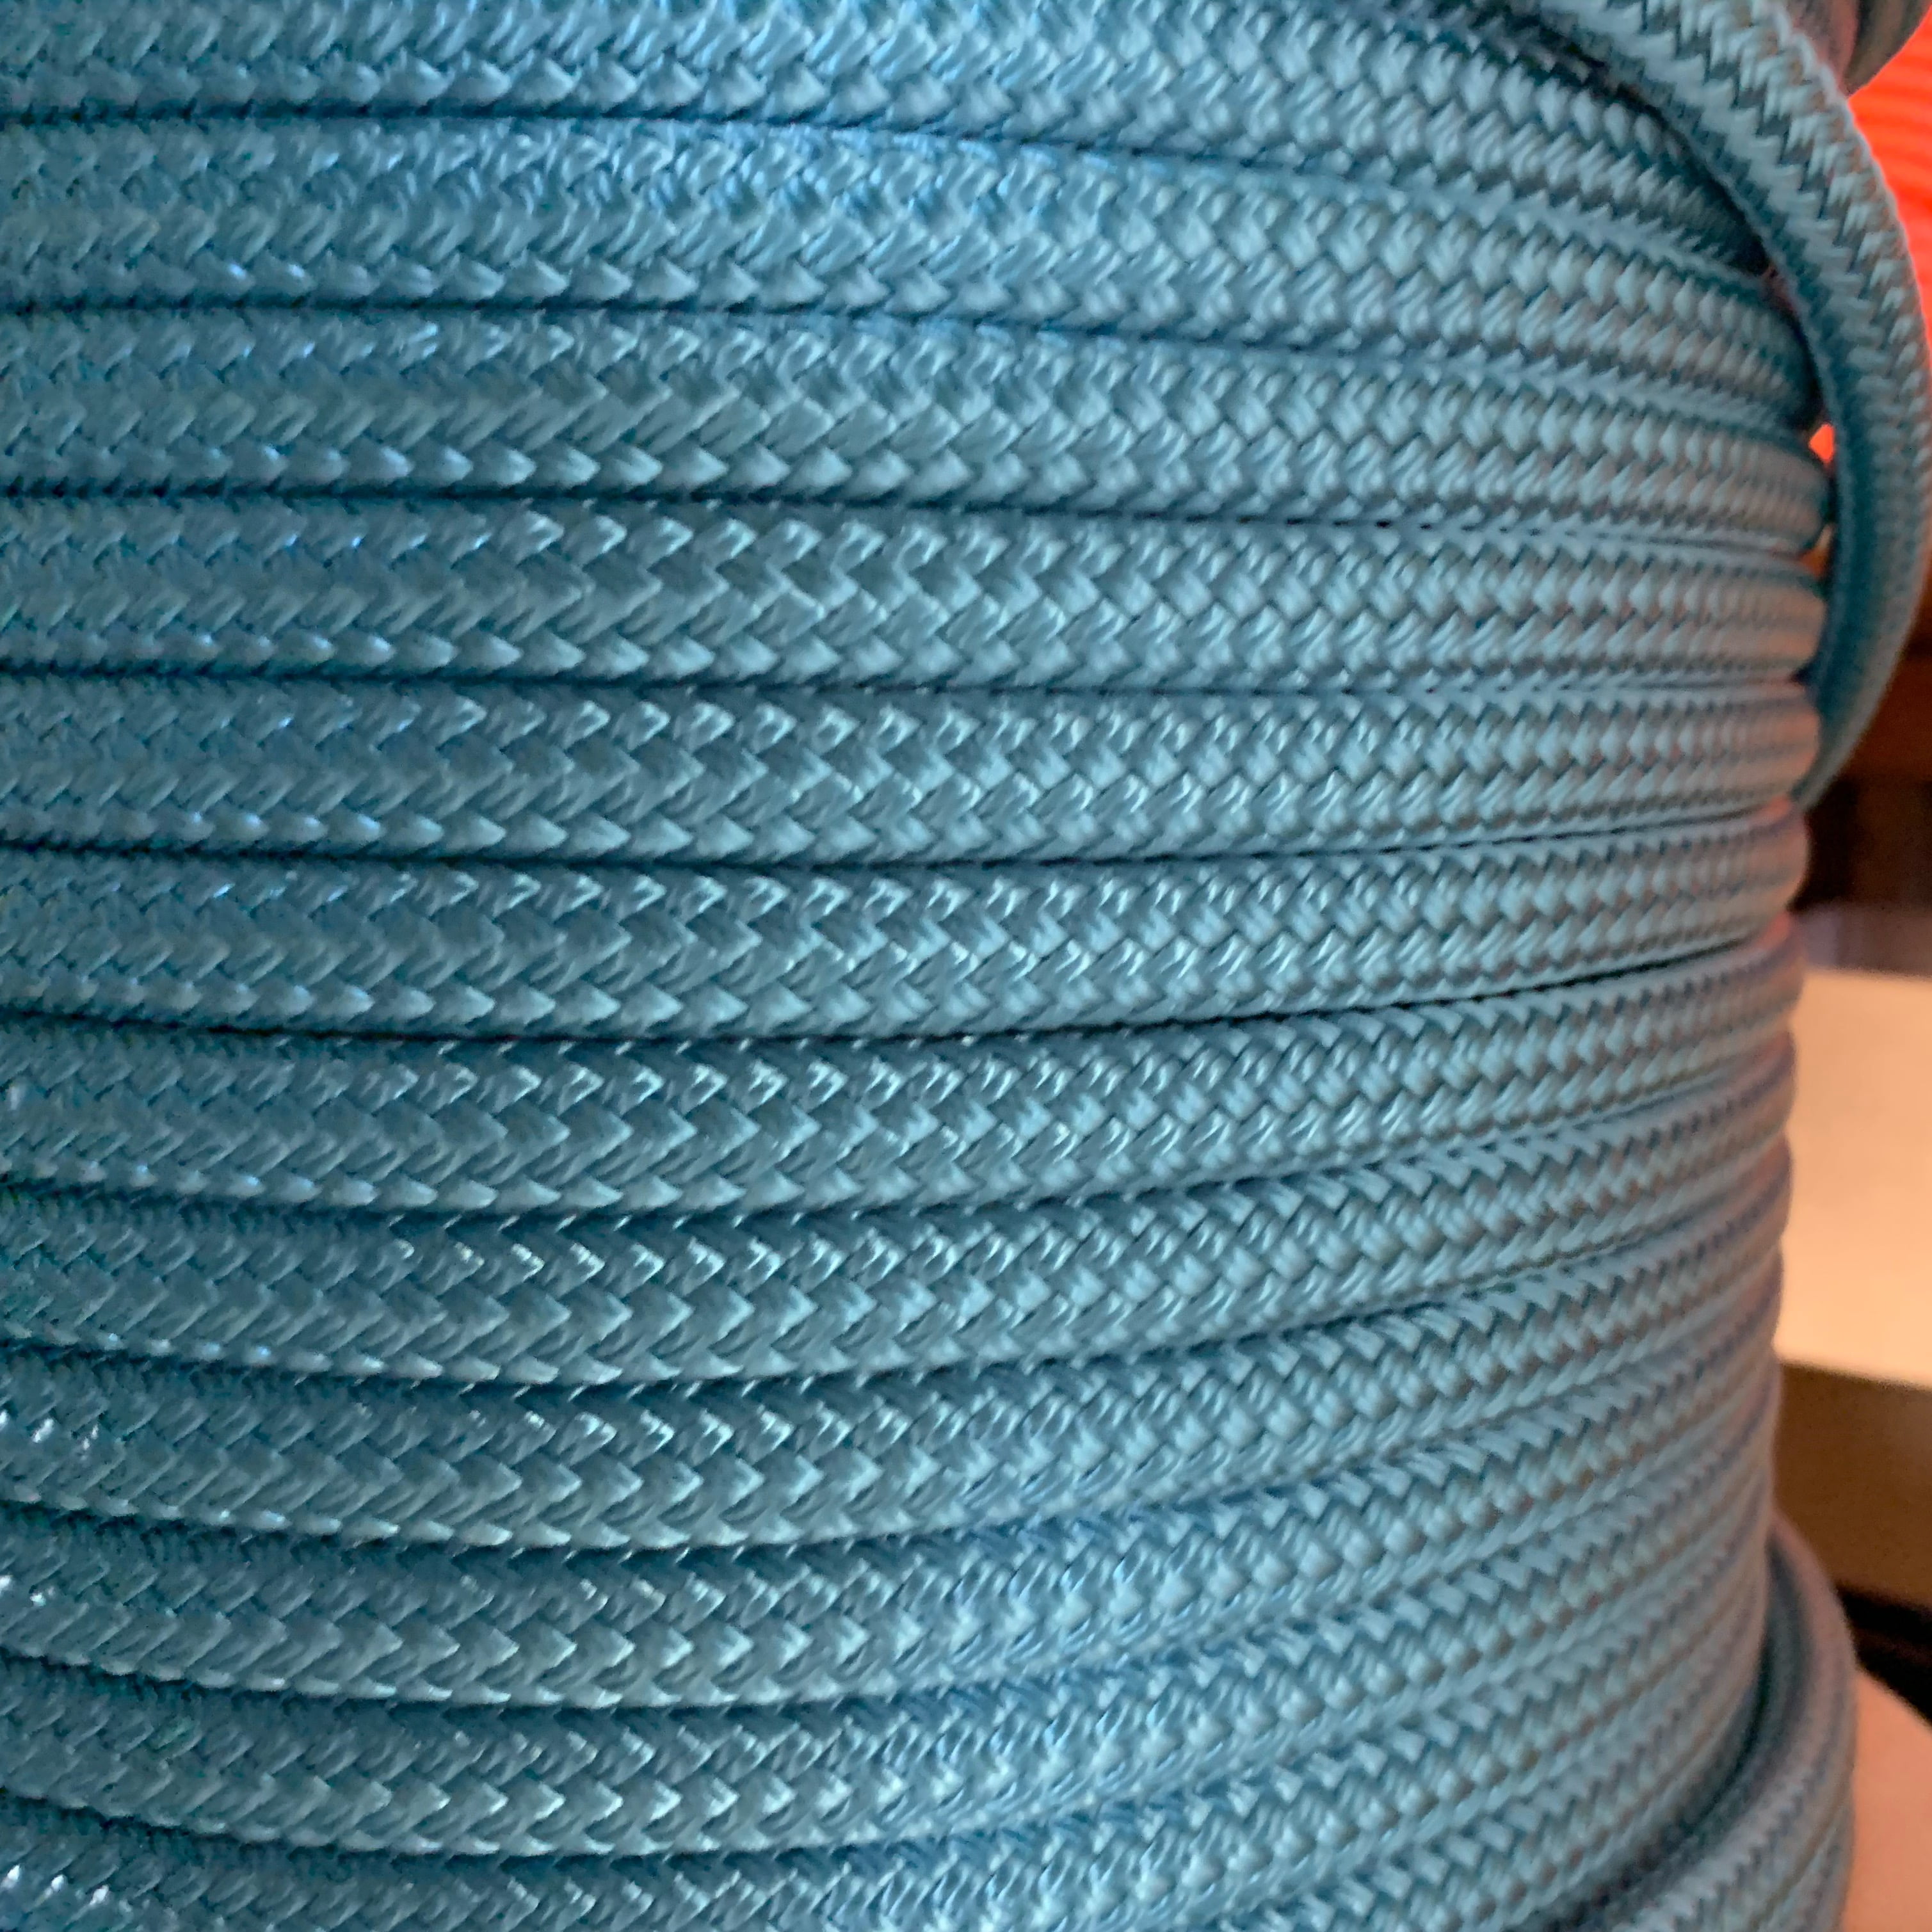 3/4” x 50 ft Double Braid~Yacht Braid Polyester Rope.Made in the USA. 